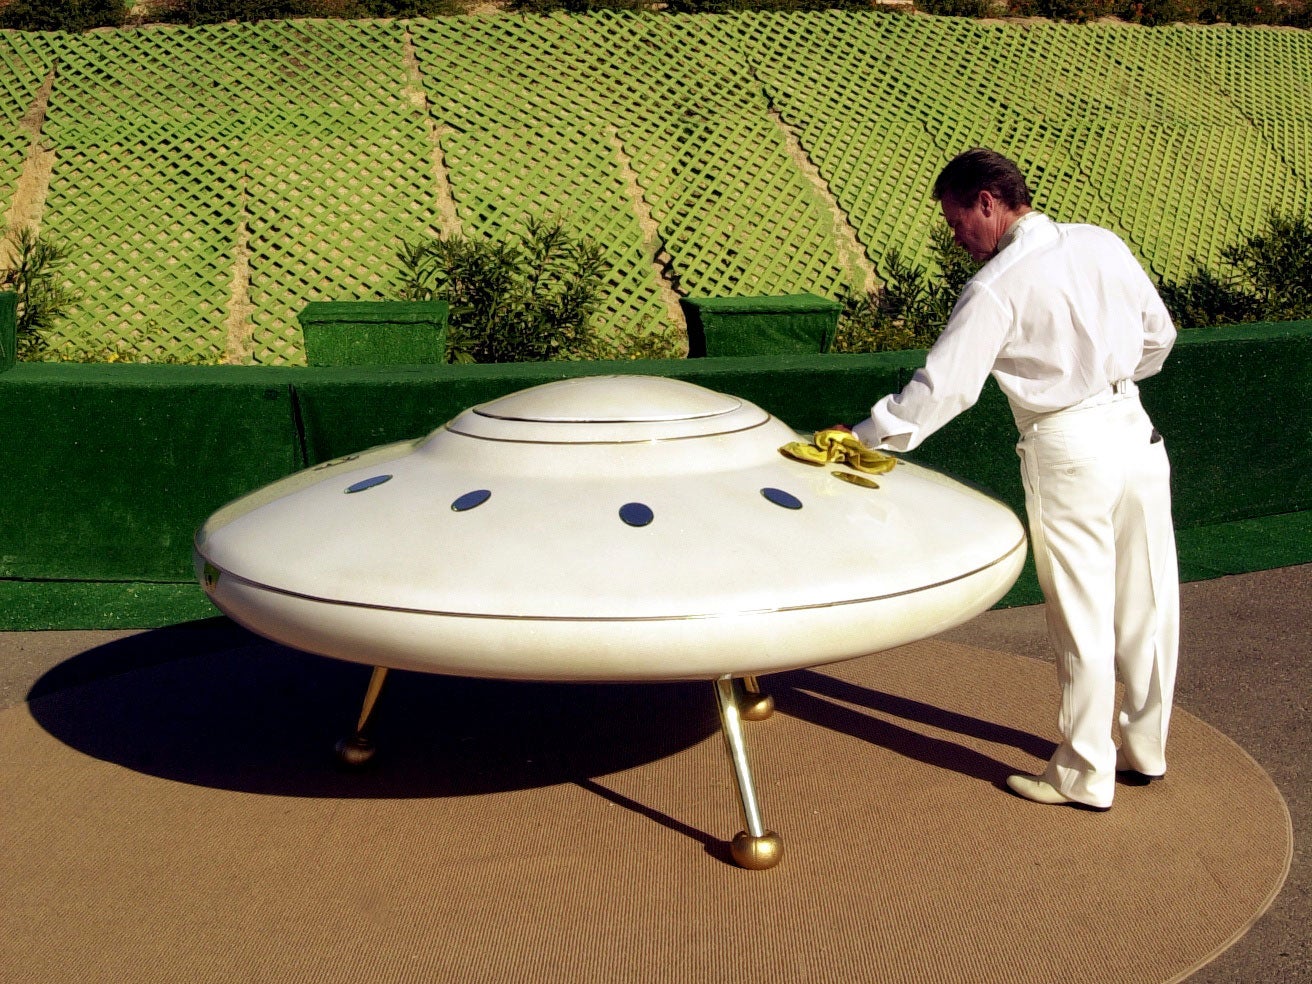 A man polishes his flying saucer in California